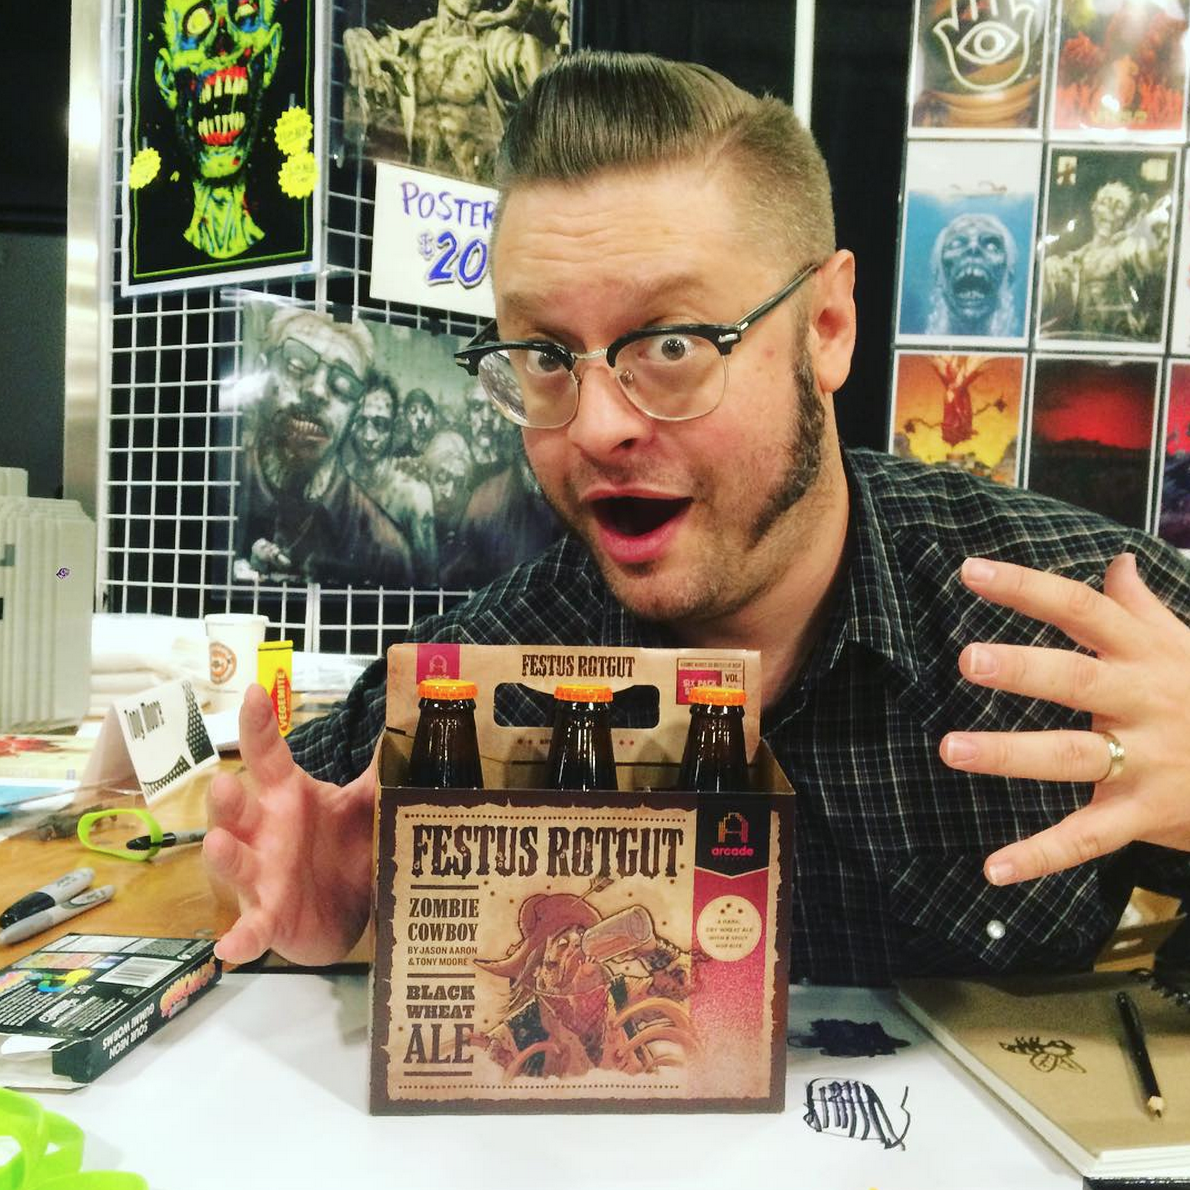 The great Tim Seeley and Arcade's 6 Pack Story/beer, Festus Rotgut (photo courtesy of Arcade's awesome Instagram)